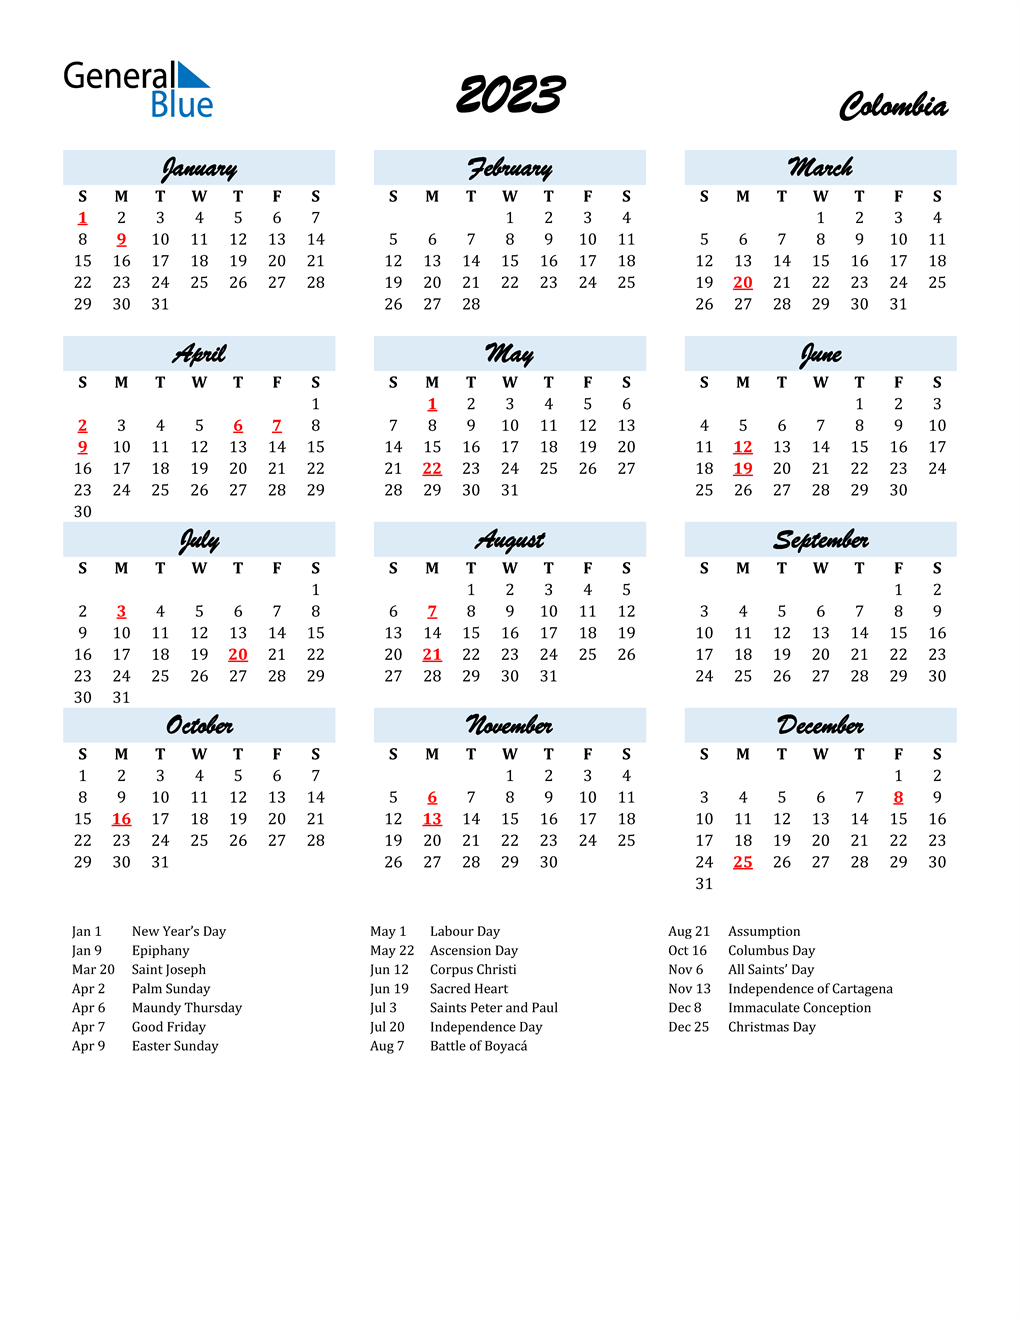 2023 Calendar for Colombia with Holidays